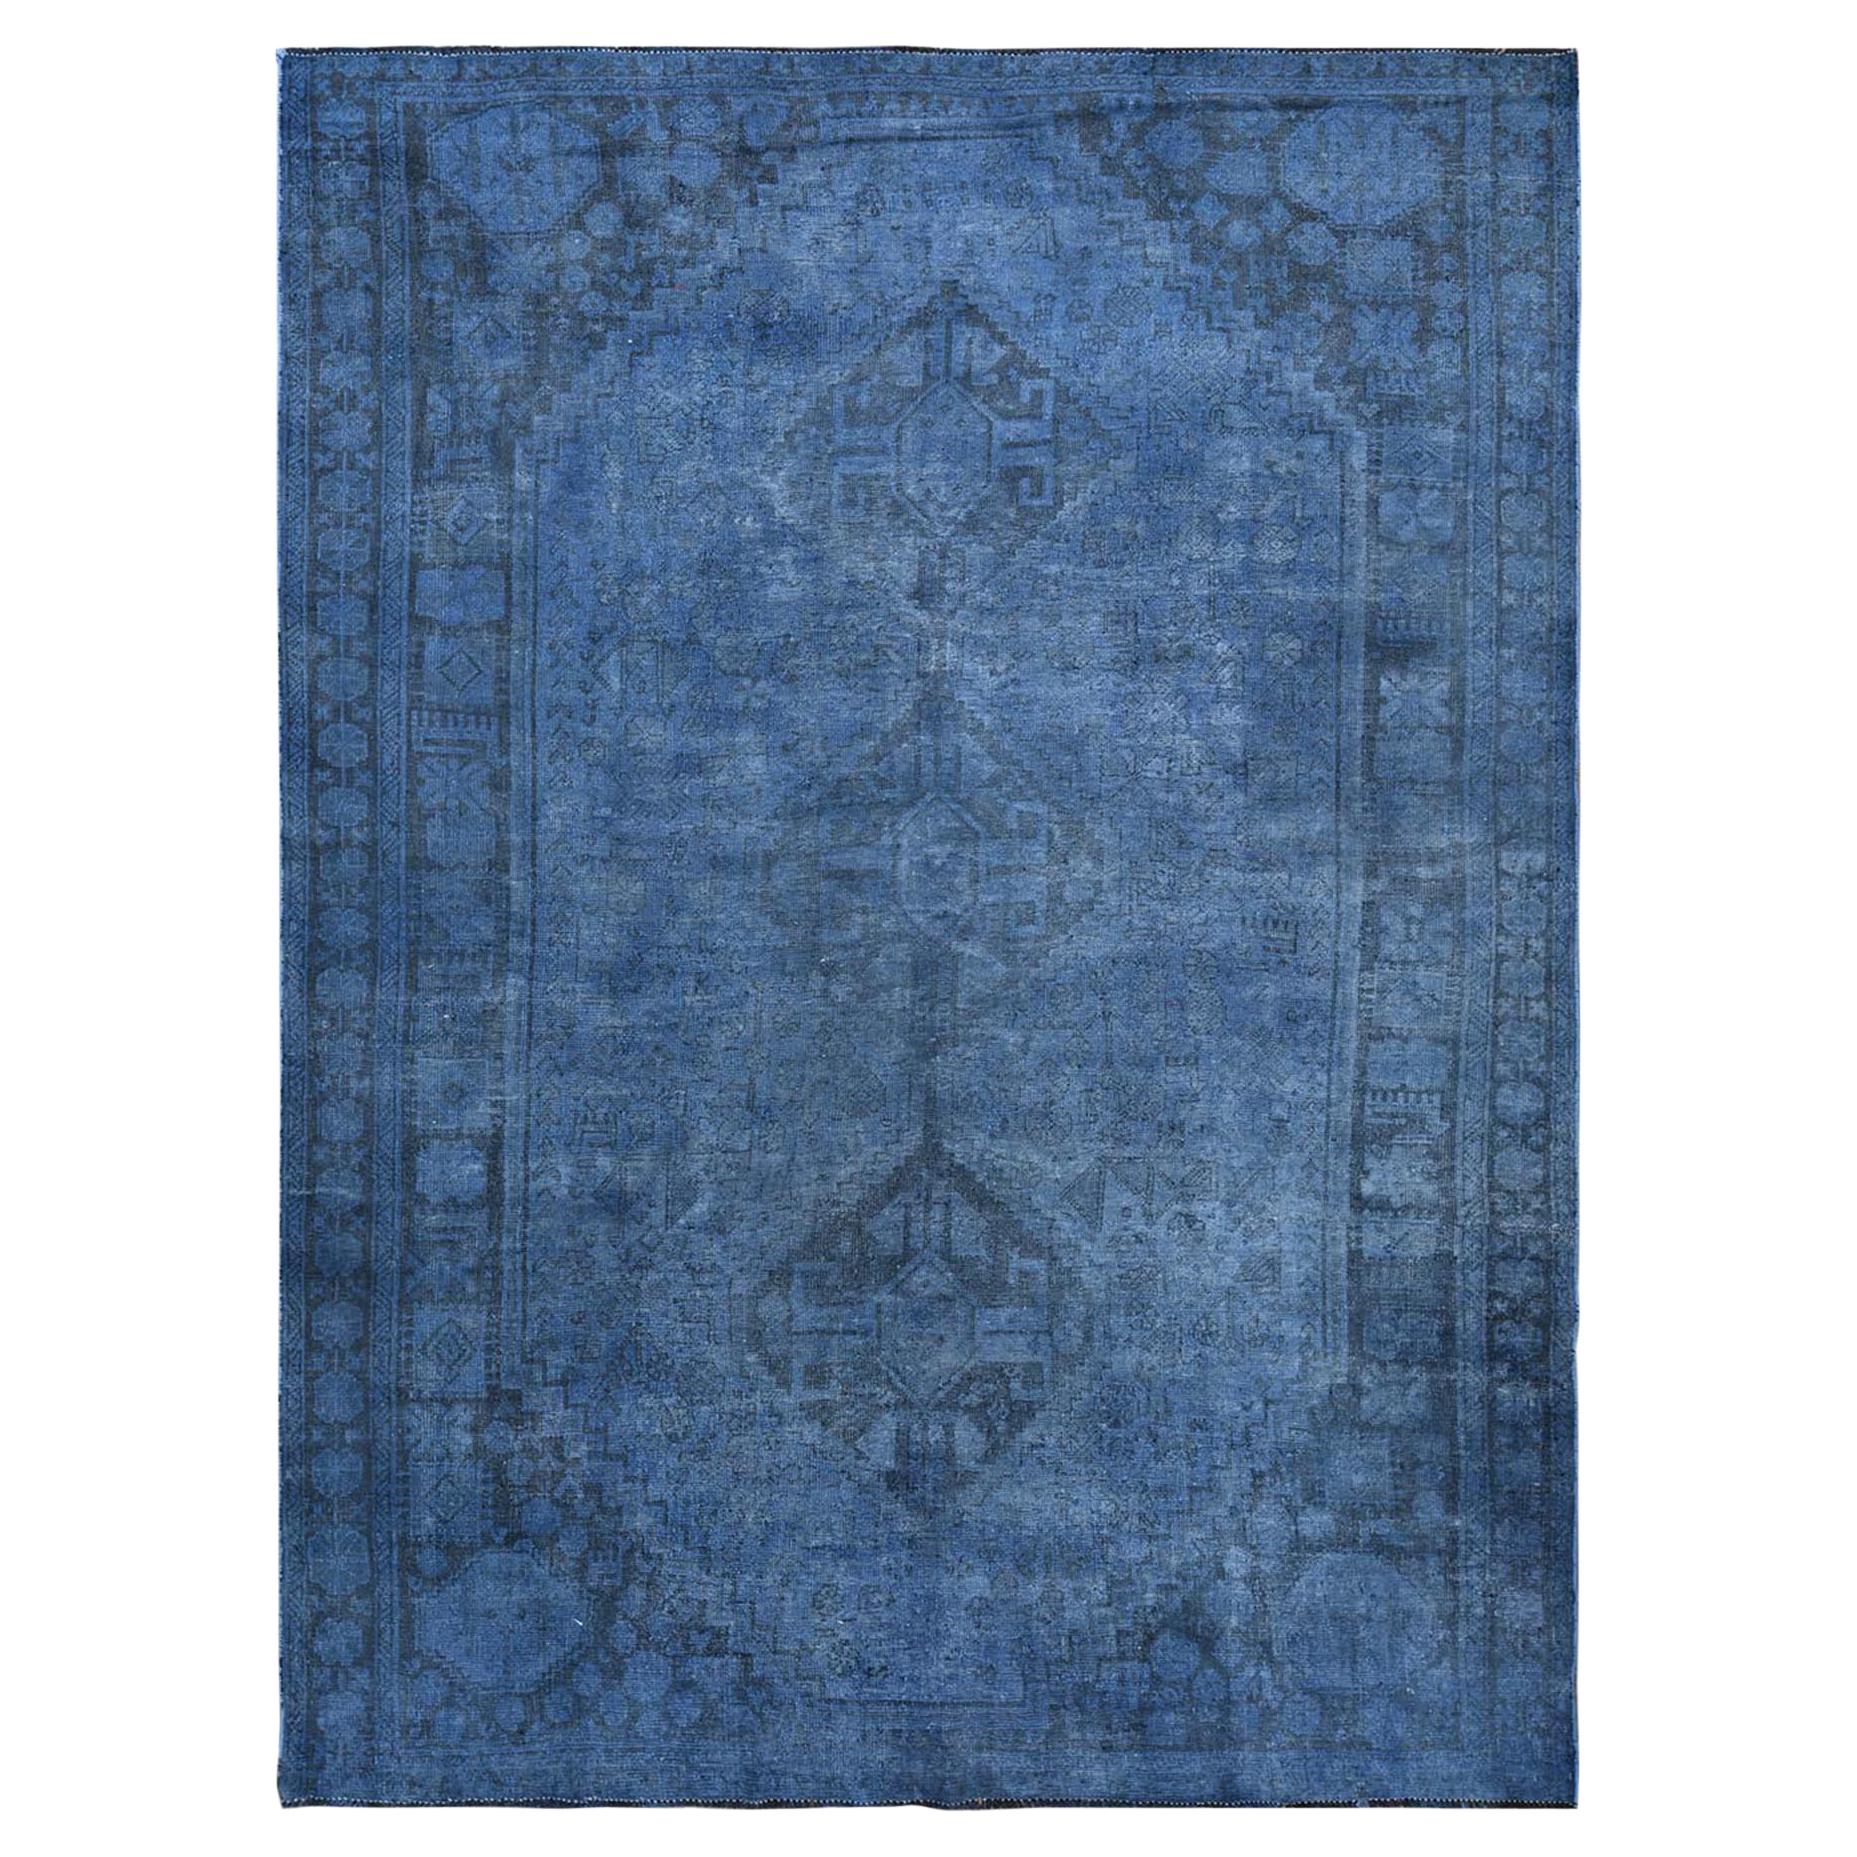 Vintage Overdyed Blue Cast Persian Qashqai with Serrated Medallion Worn Wool Rug